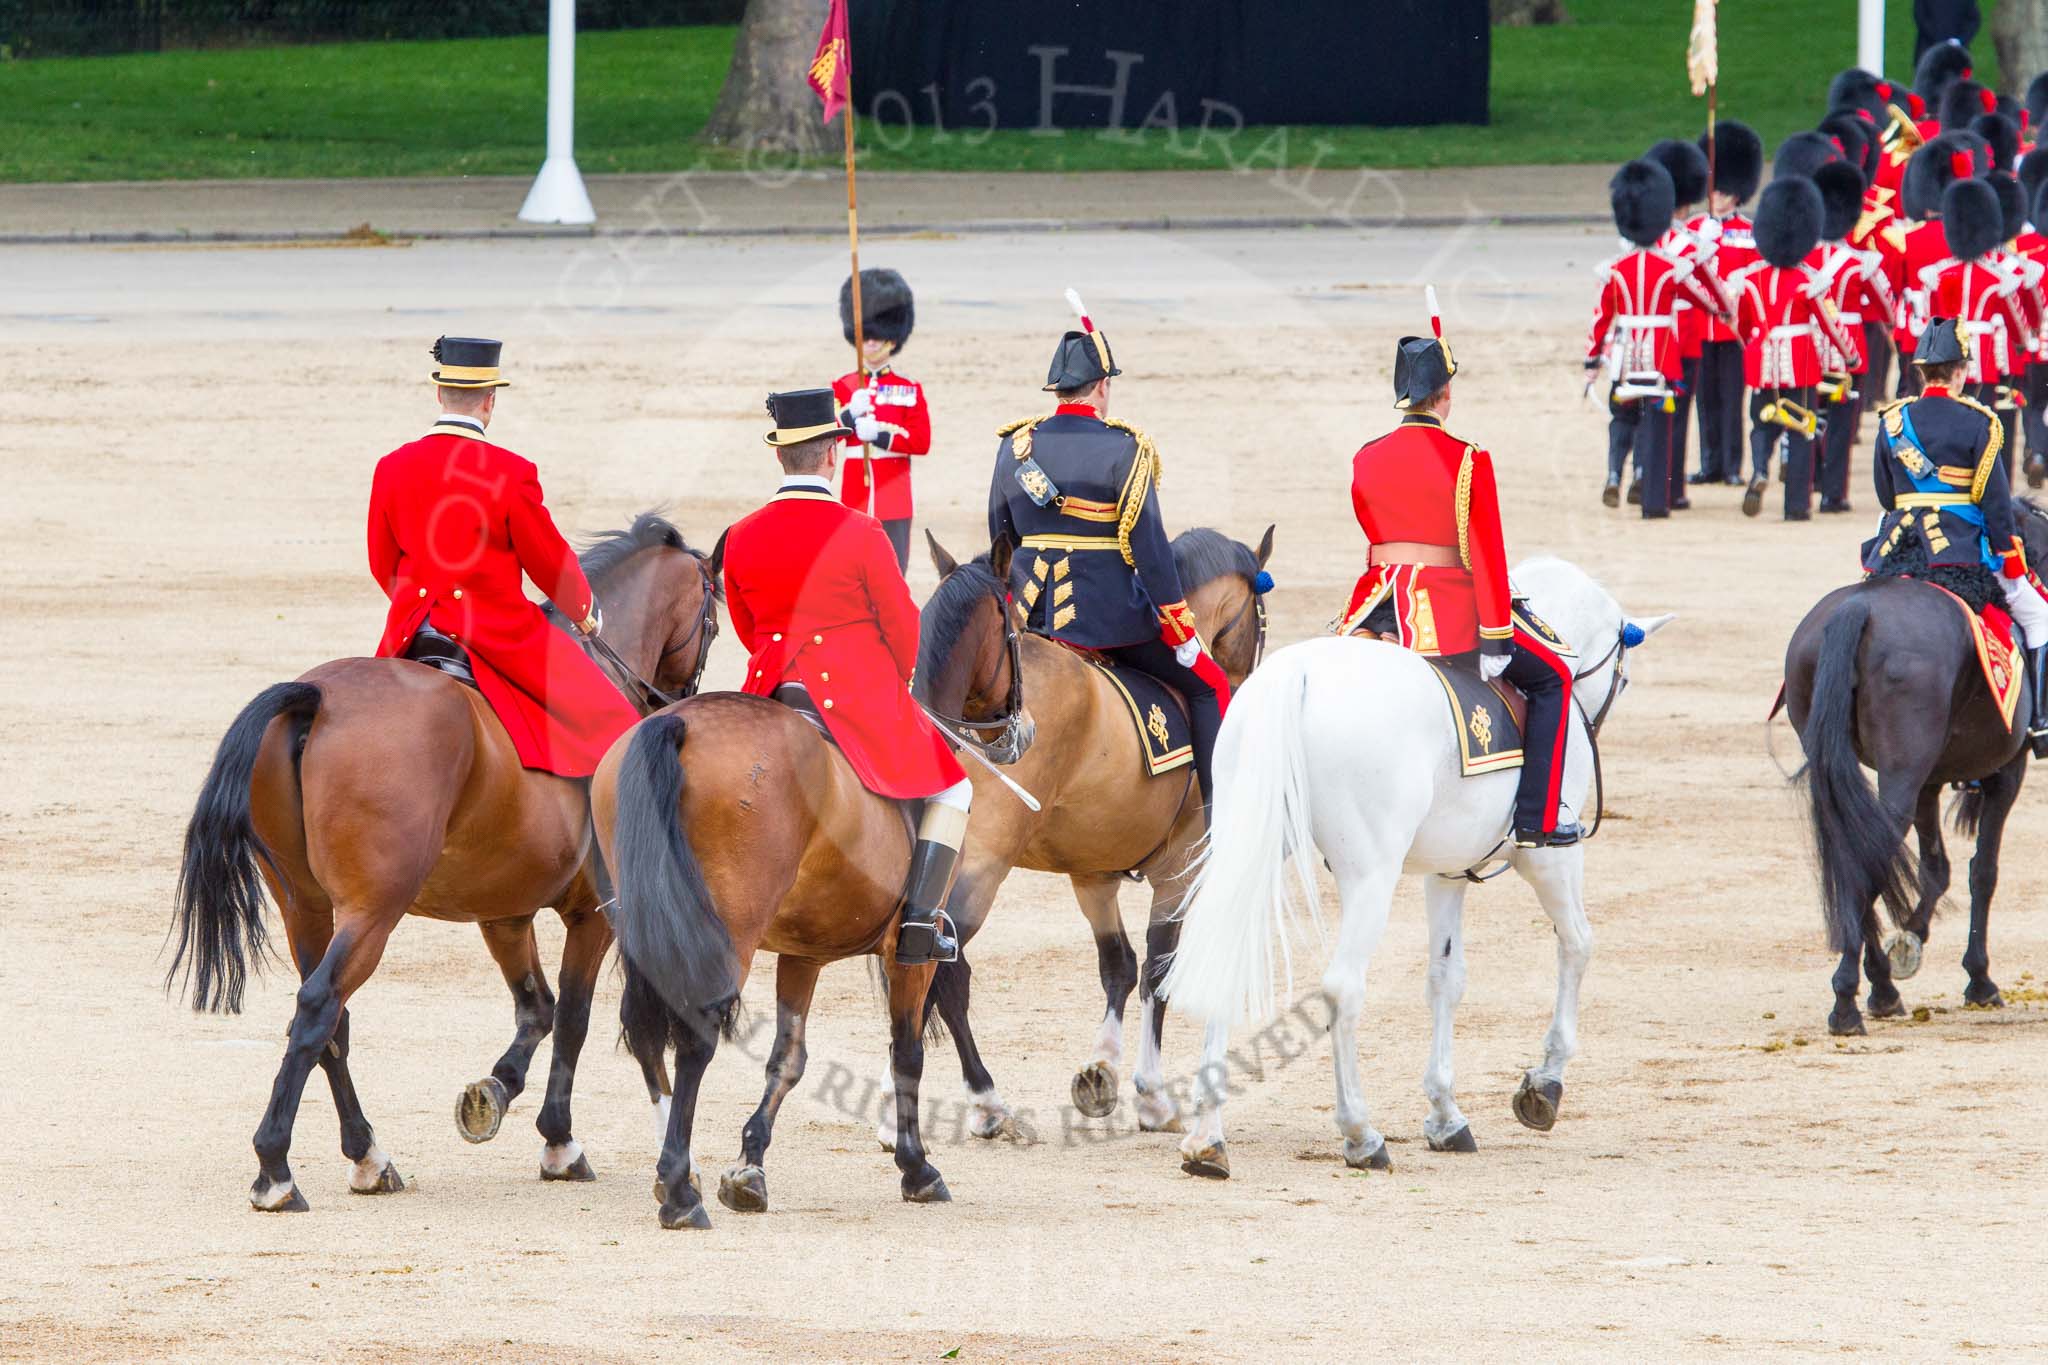 Trooping the Colour 2013: Following the Royal Colonels (HTH the Princess Royal on the right) are the Crown Equerry Colonel Toby Browne and the Equerry in Waiting to Her Majesty, Lieutenant Colonel Alexander Matheson of Matheson, younger. Behind them two grooms from the Royal Household. Image #828, 15 June 2013 12:11 Horse Guards Parade, London, UK